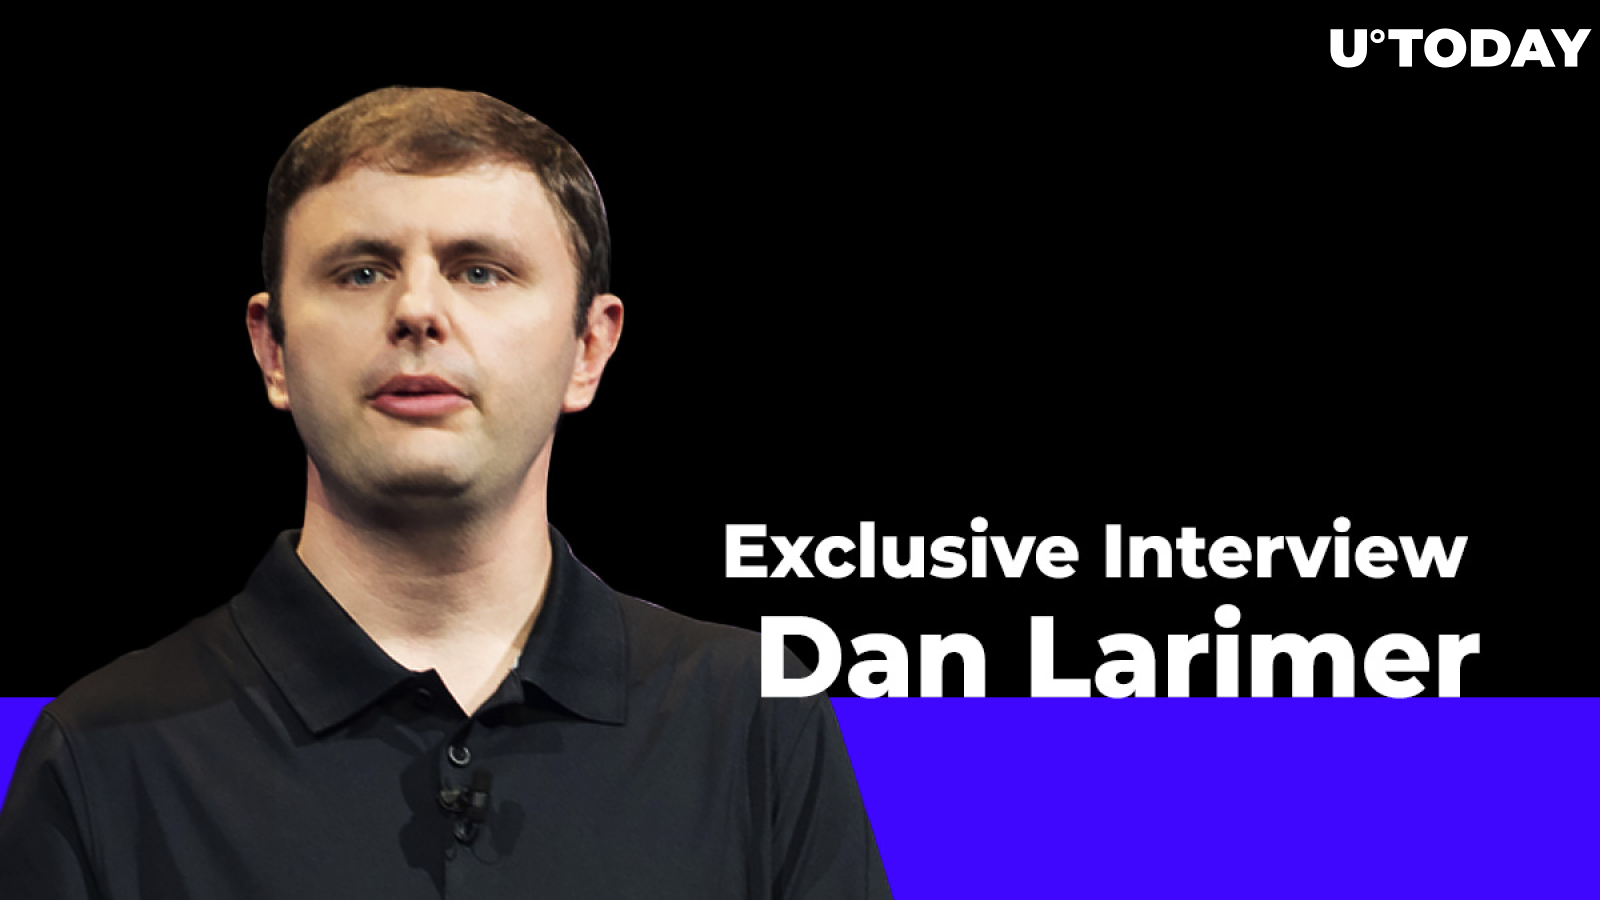 Exclusive Interview with Dan Larimer on Voice, EOSIO’s Plans, and Mass Adoption